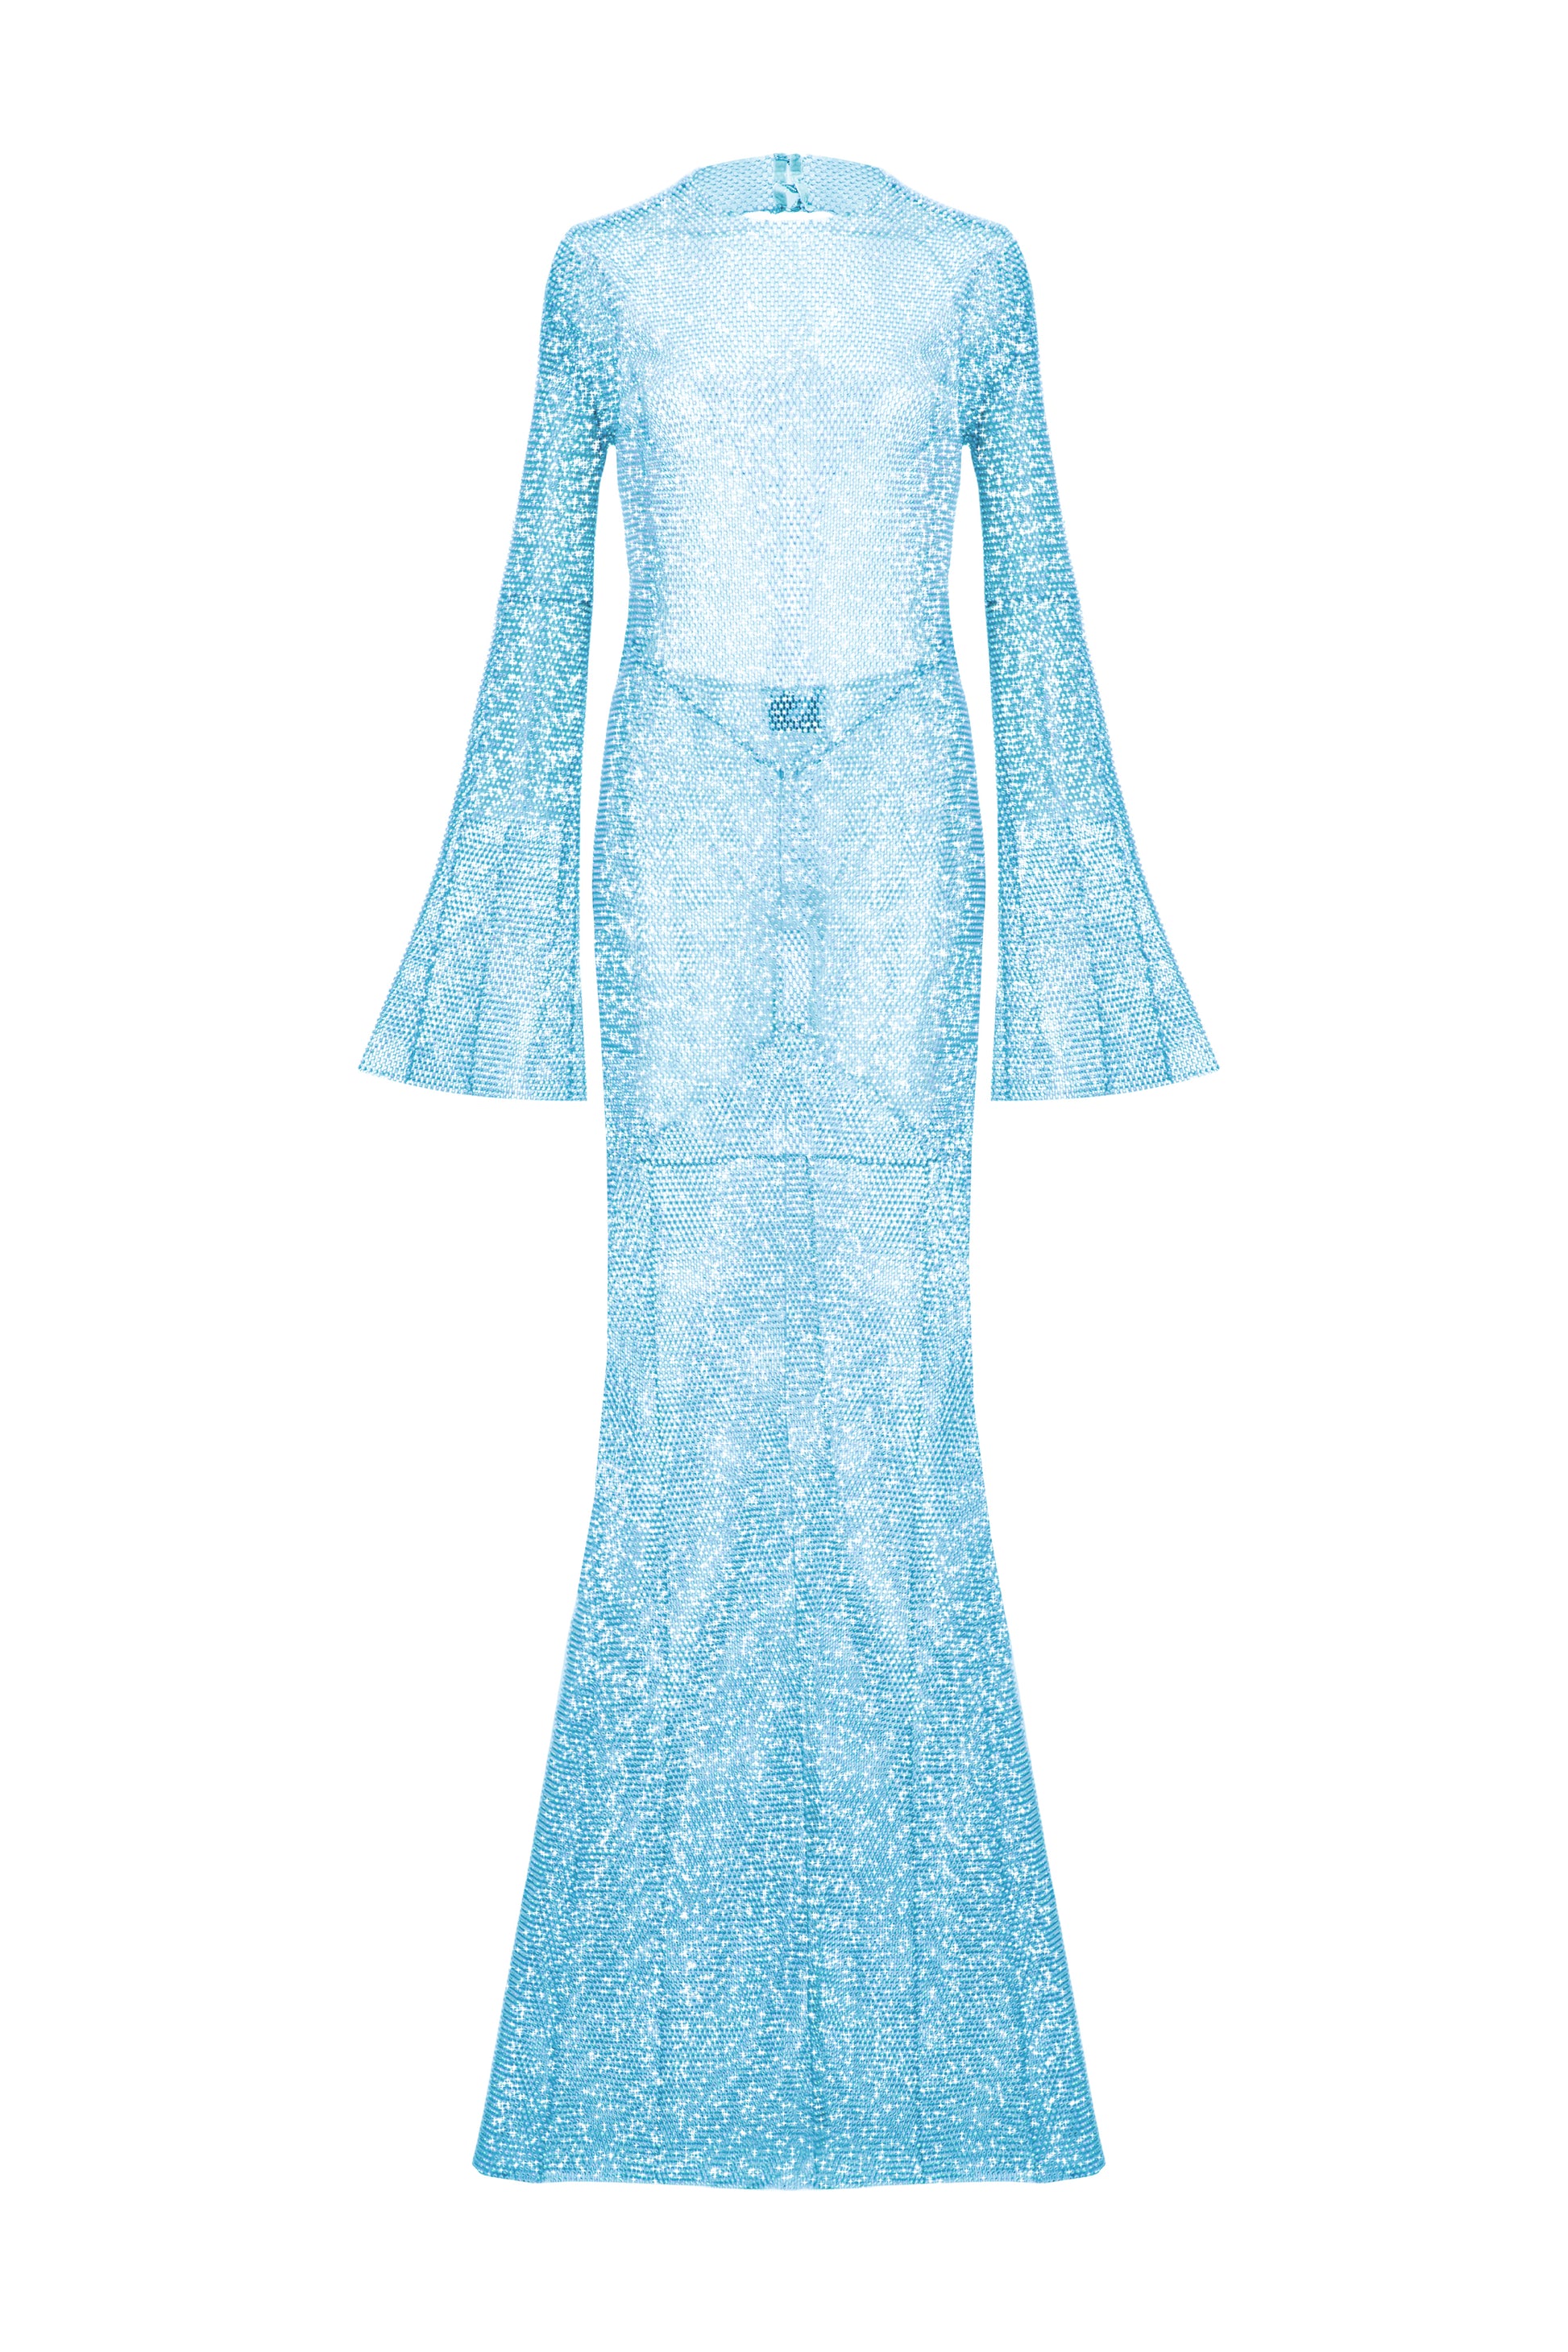 SANTA Crystal Maxi Flared Dress with Open Back - Light Blue front